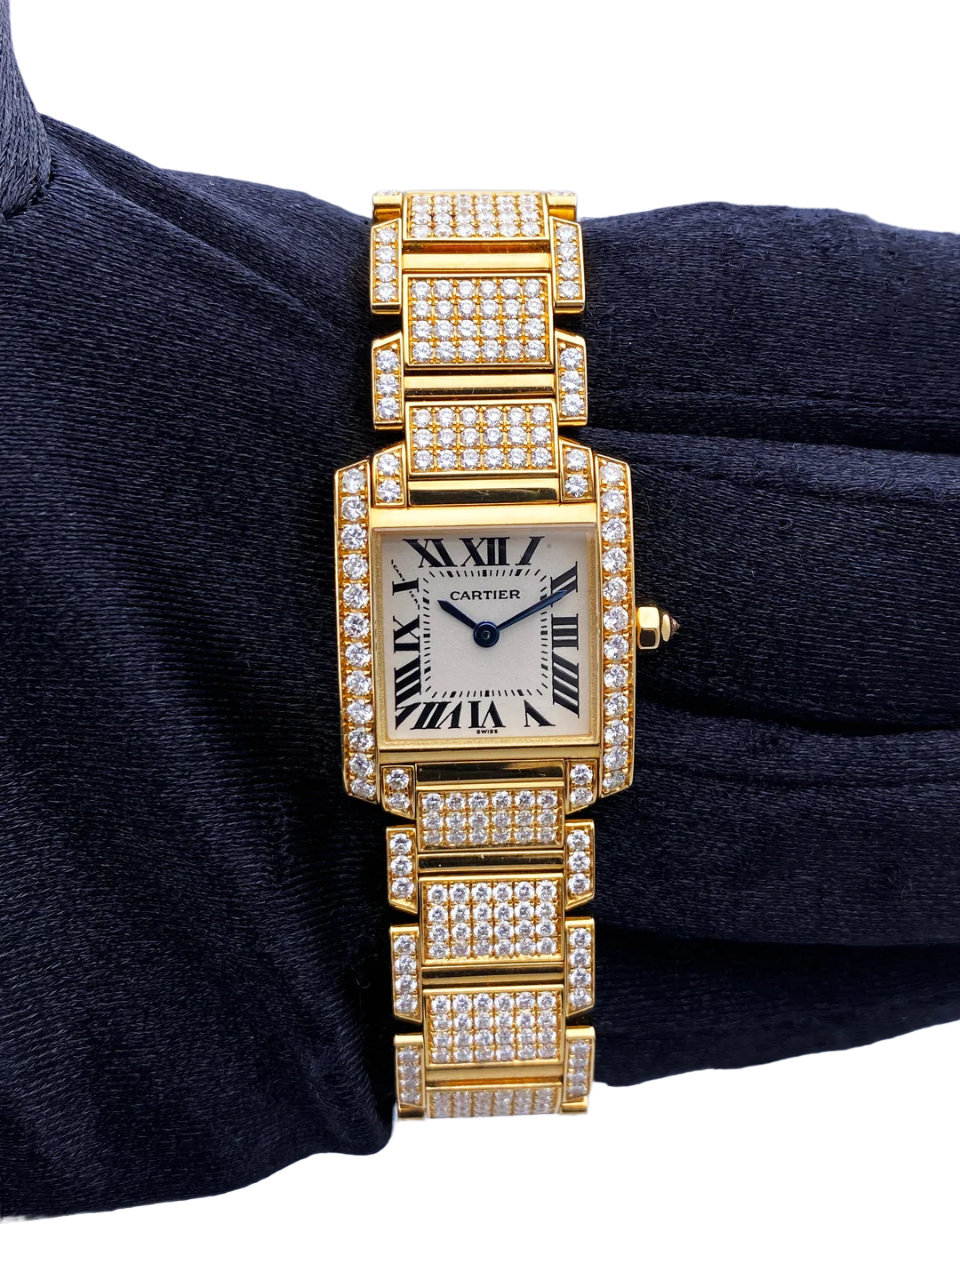 Cartier Tank Francaise WE1001RD Diamond Ladies Watch Box Papers